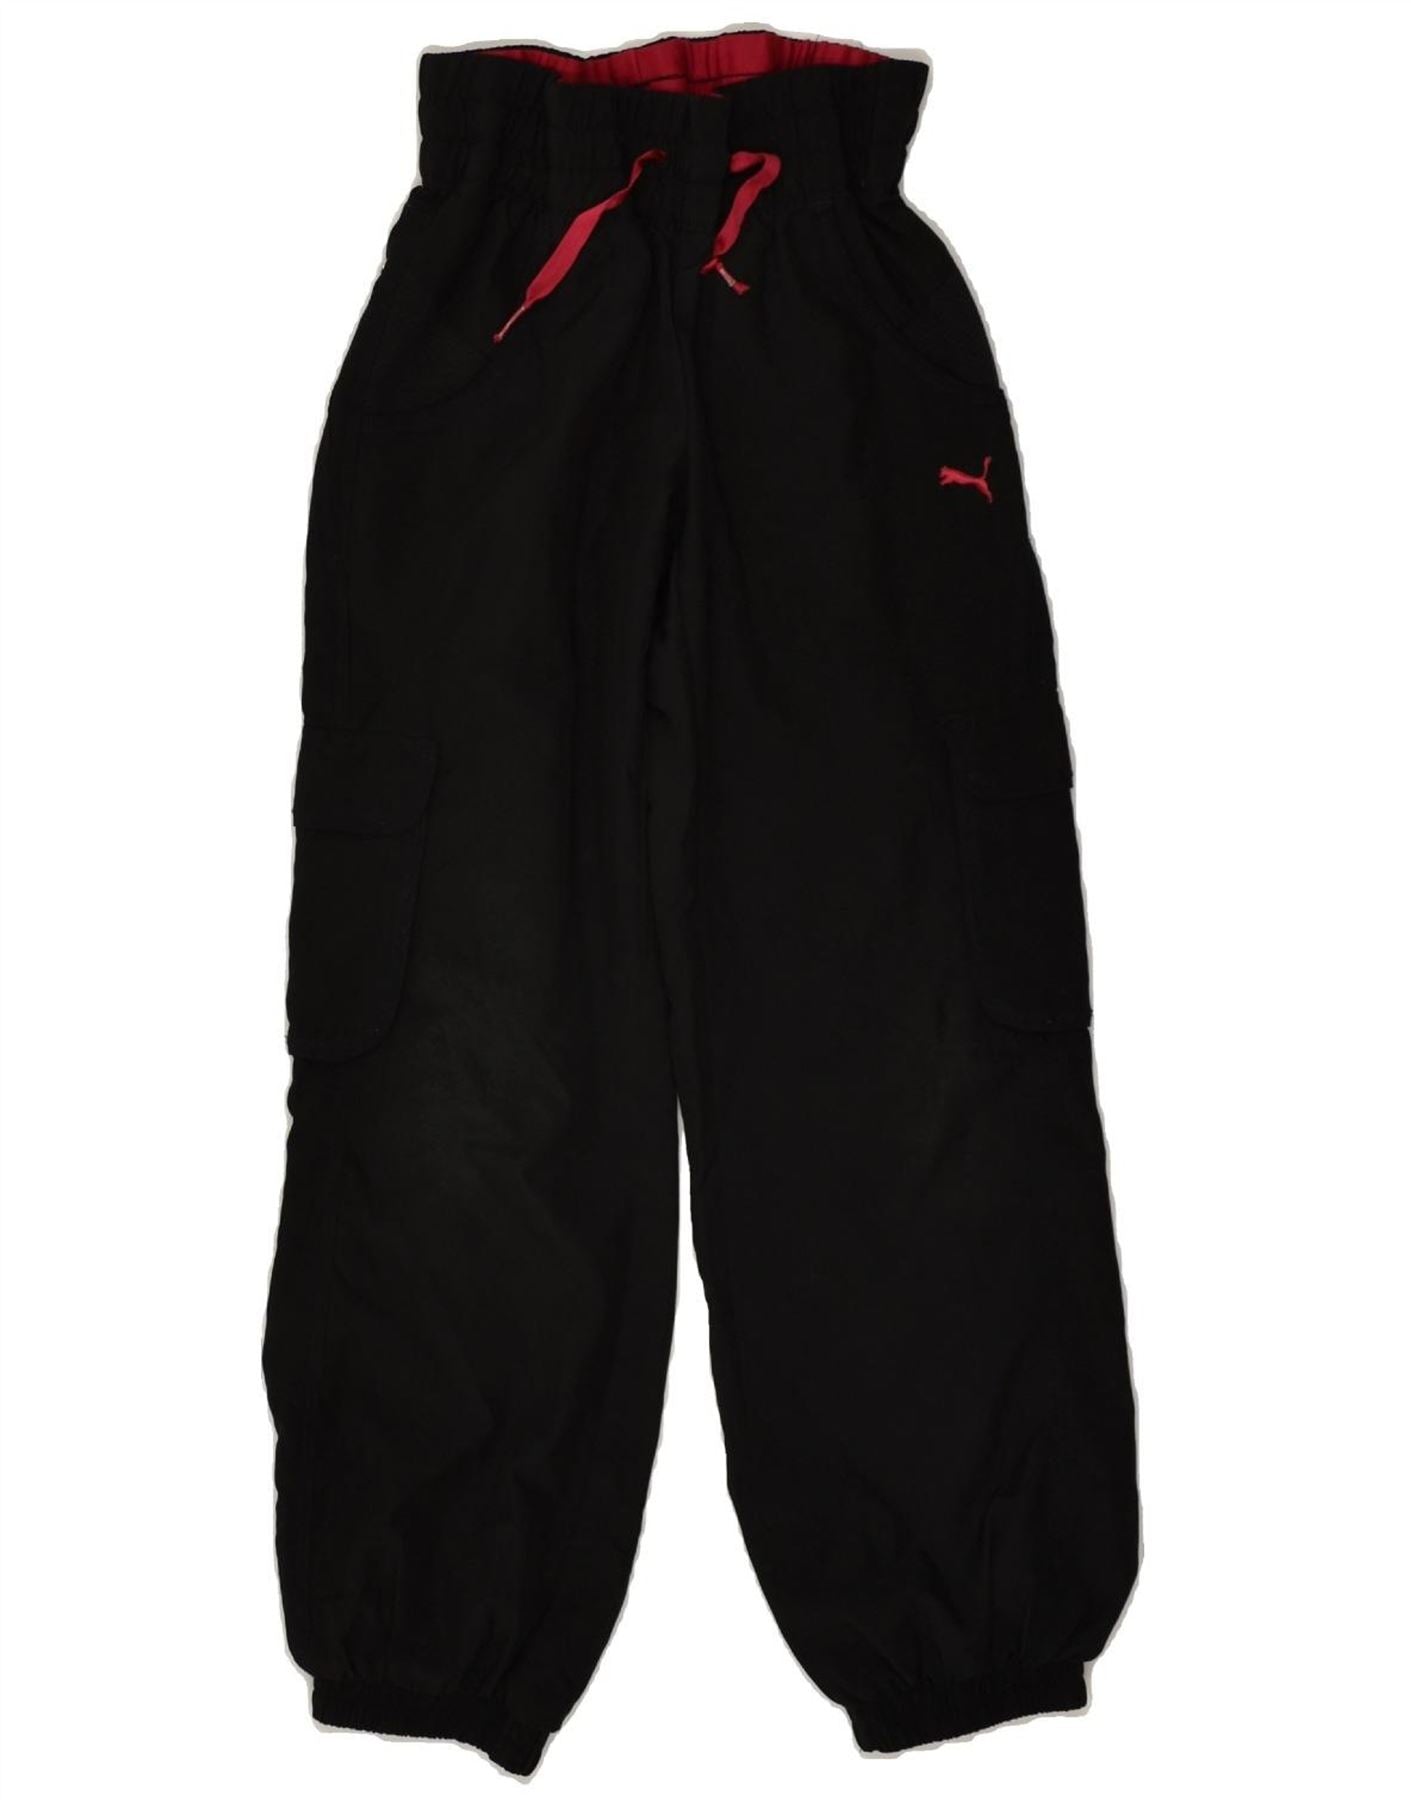 Buy Black Cargo Trousers 9 years | Trousers and joggers | Argos